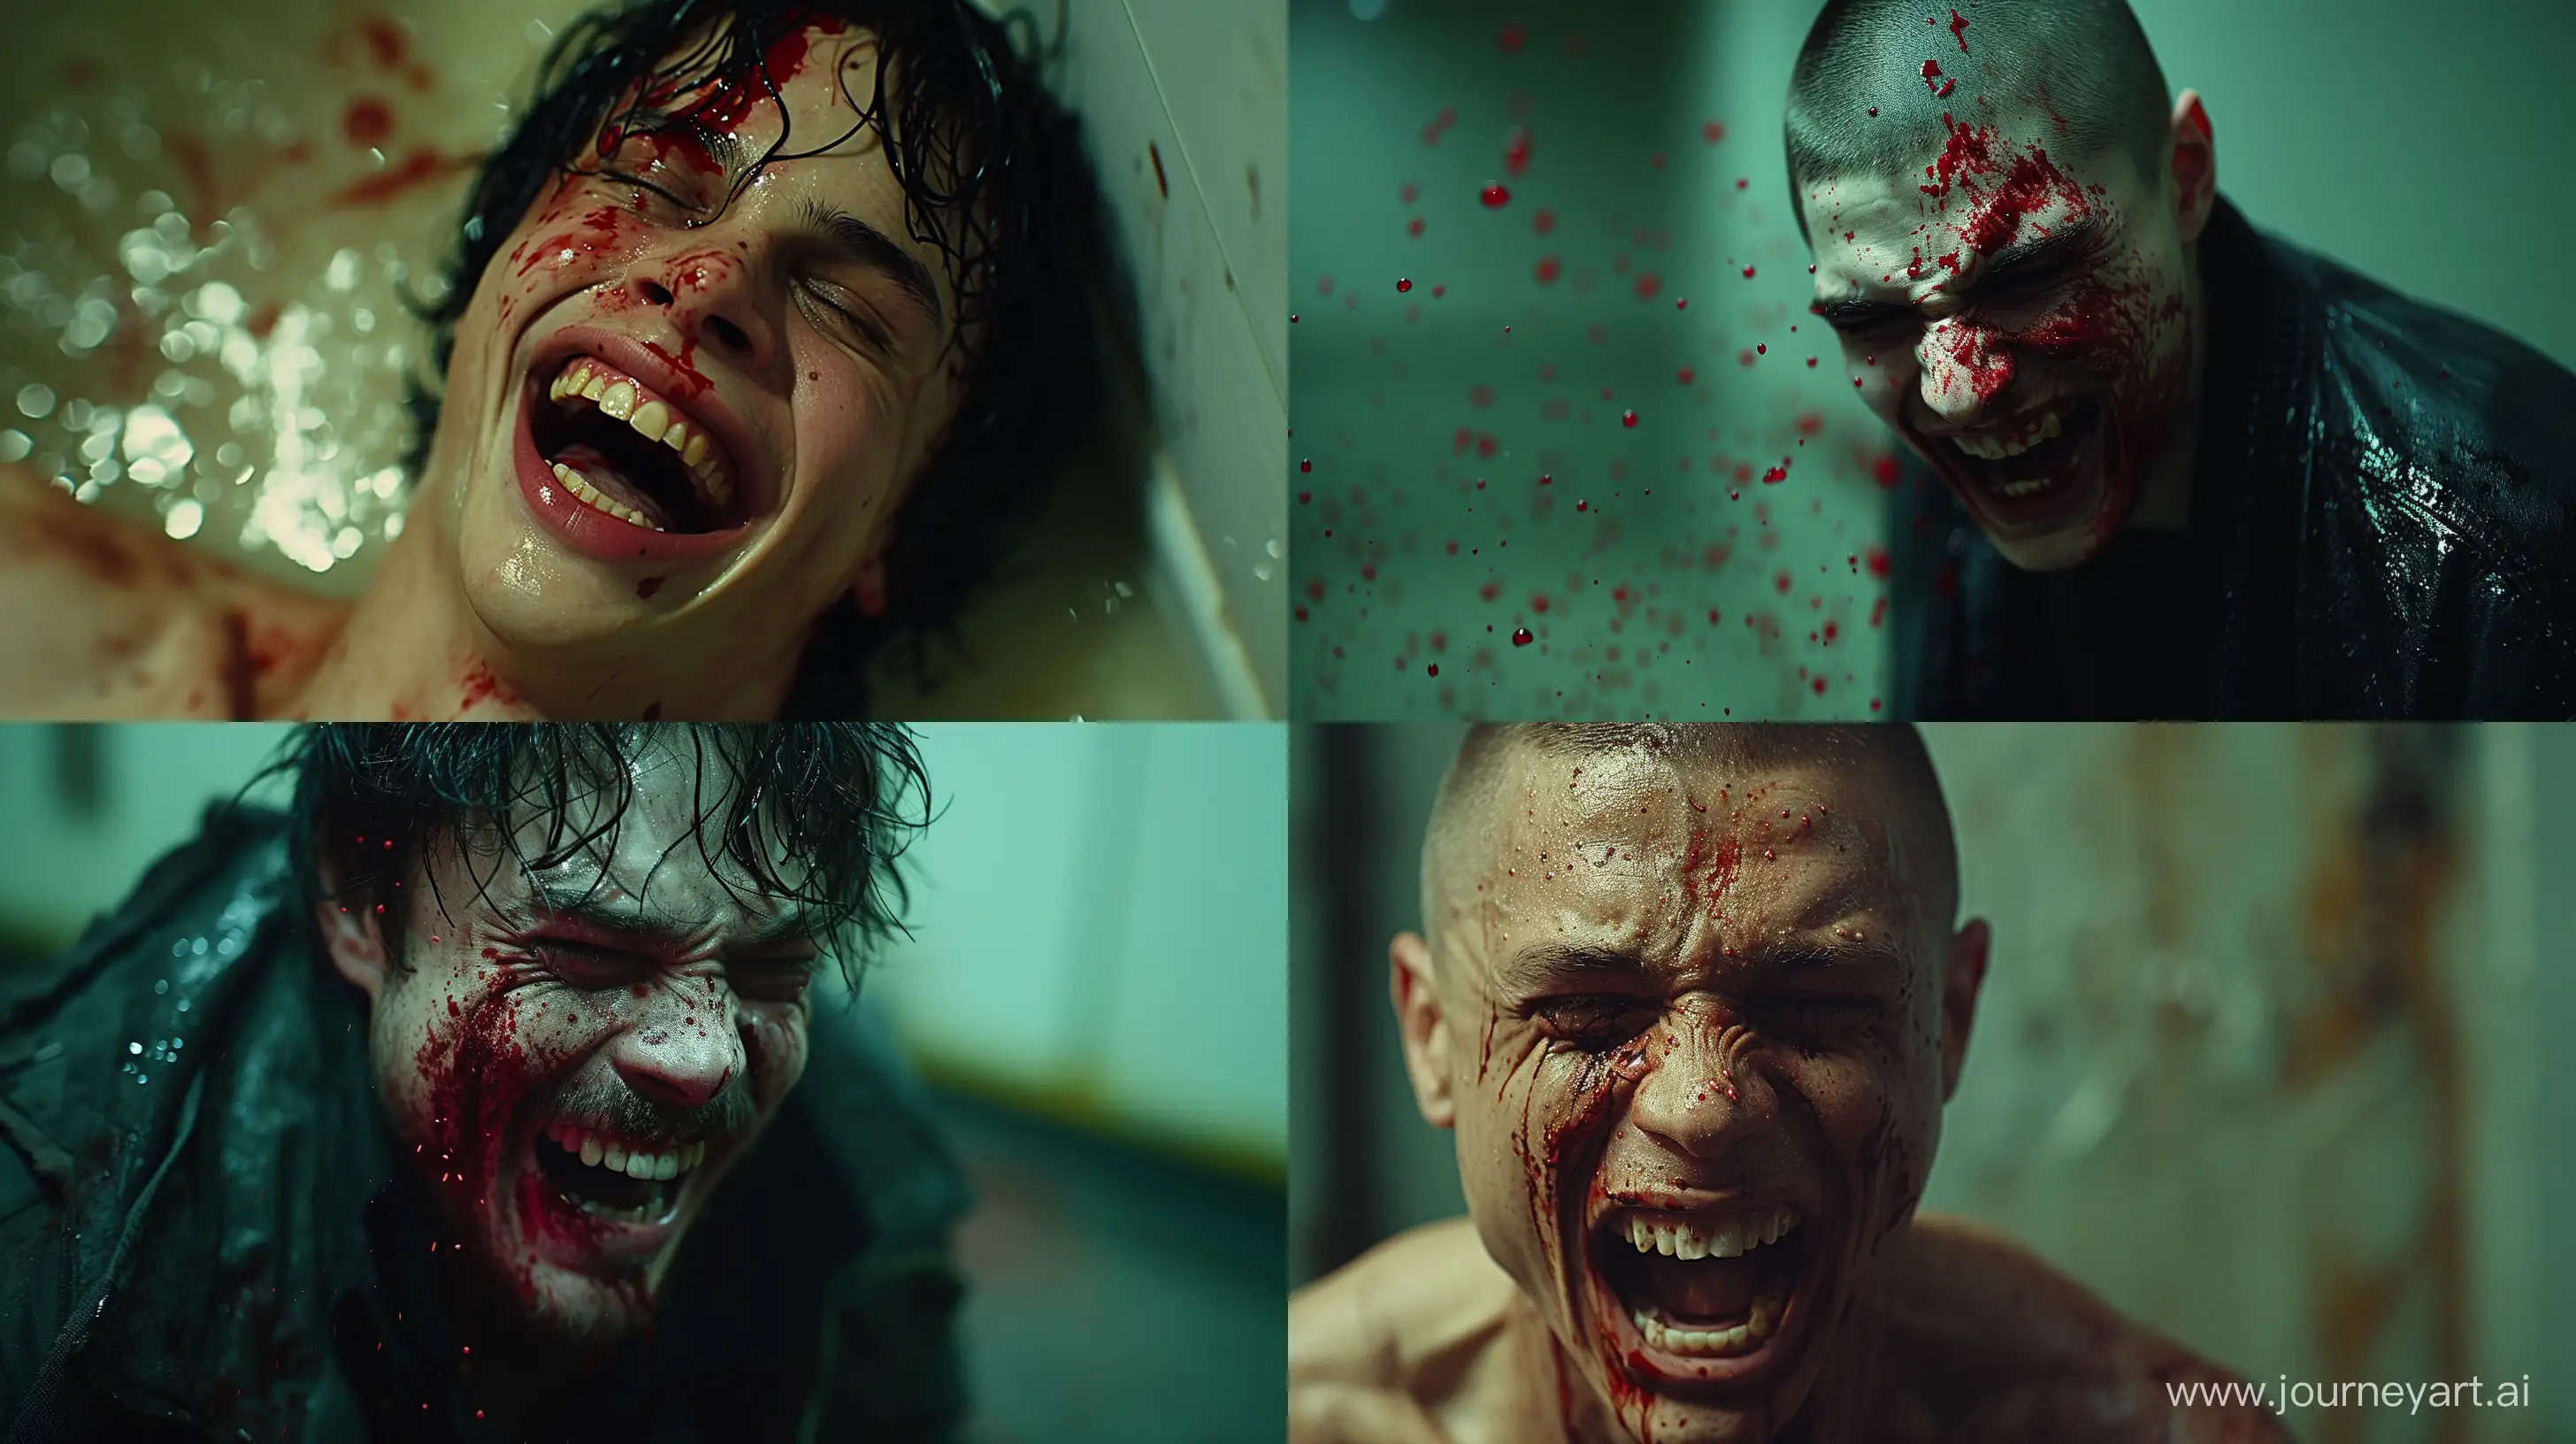 Homelander-Bloodied-Laugh-Photorealistic-Portrayal-from-The-Boys-Series